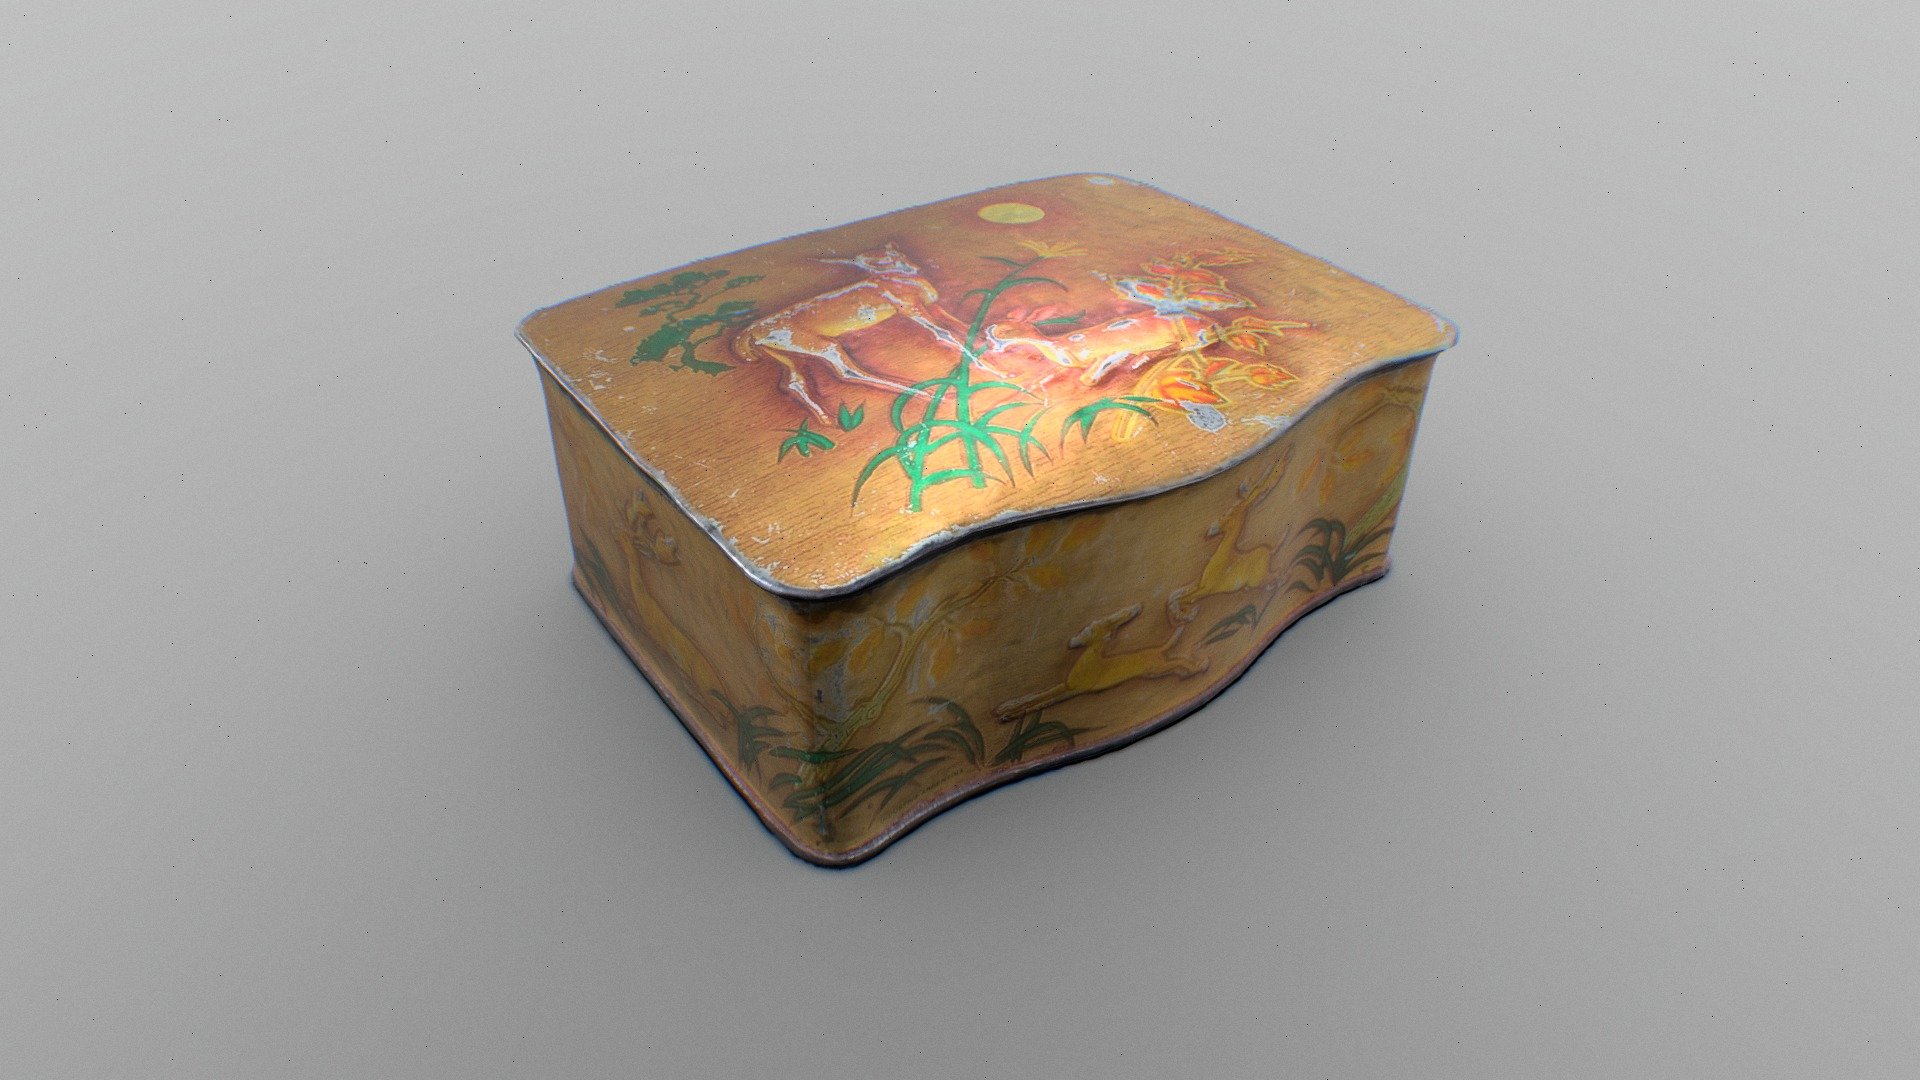 Old sewing box for decoration.
Polygons: 5172
Vertices: 5248
3 Maps - Old Sewing Box - Download Free 3D model by Diego-M84 3d model